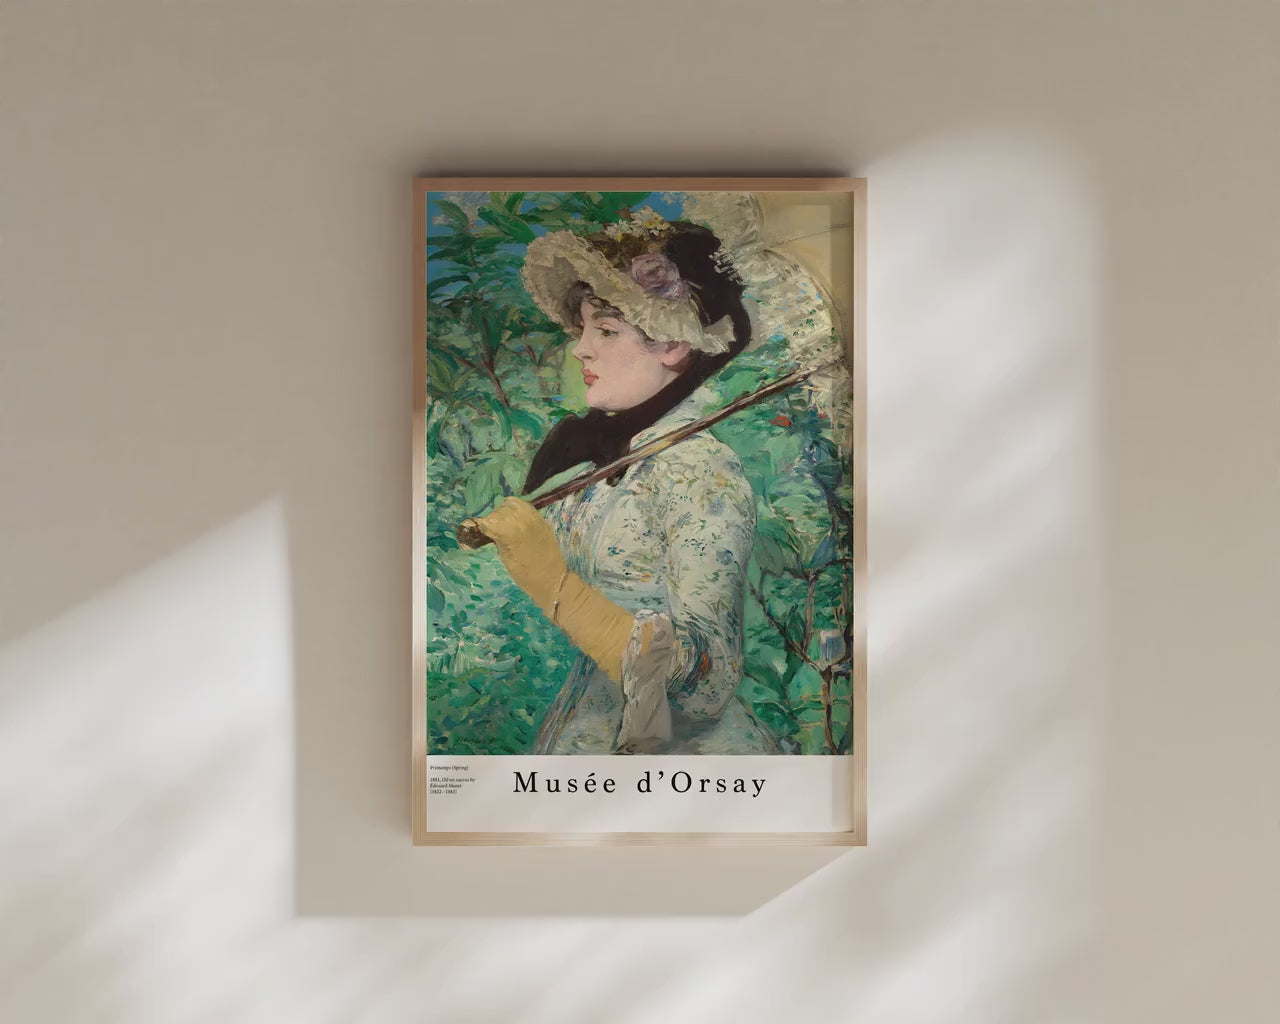 Manet Spring Painting Musee d'Orsay Museum Poster Fine Art Impressionist Painting Vintage Ready to hang Home Office Decor Gift Idea for her